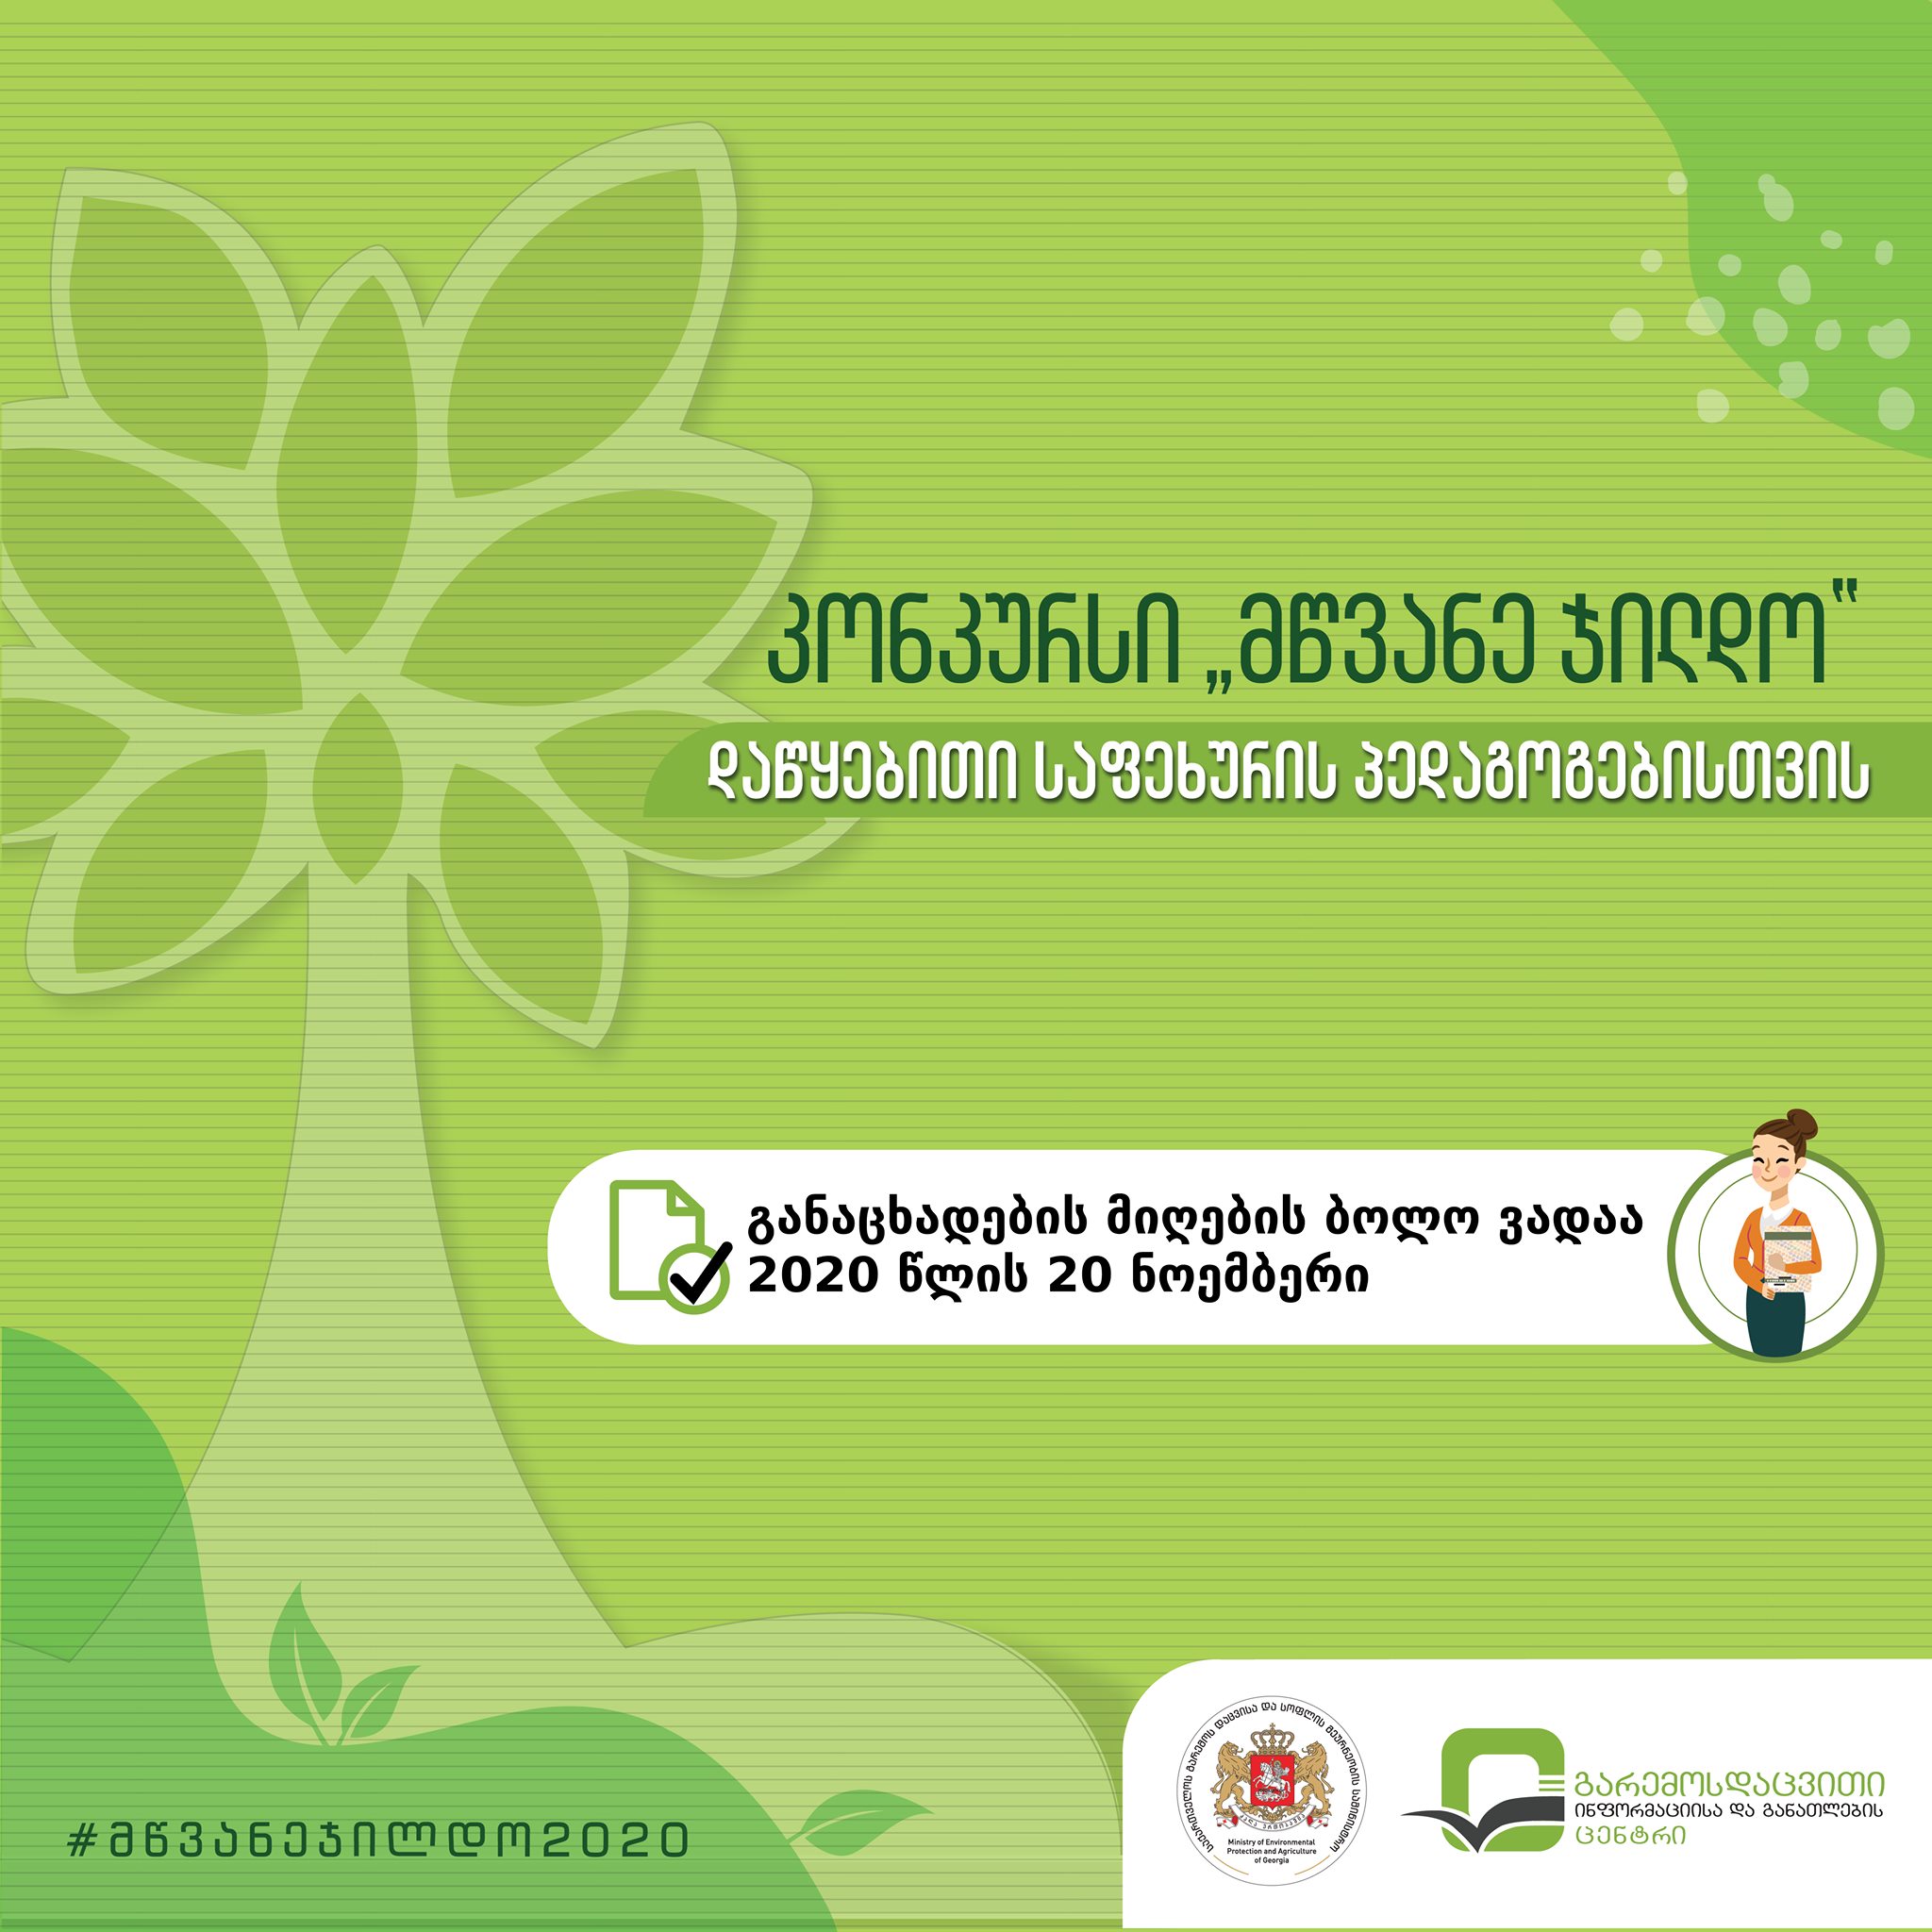 The contest  "Green Award" for primary school teachers